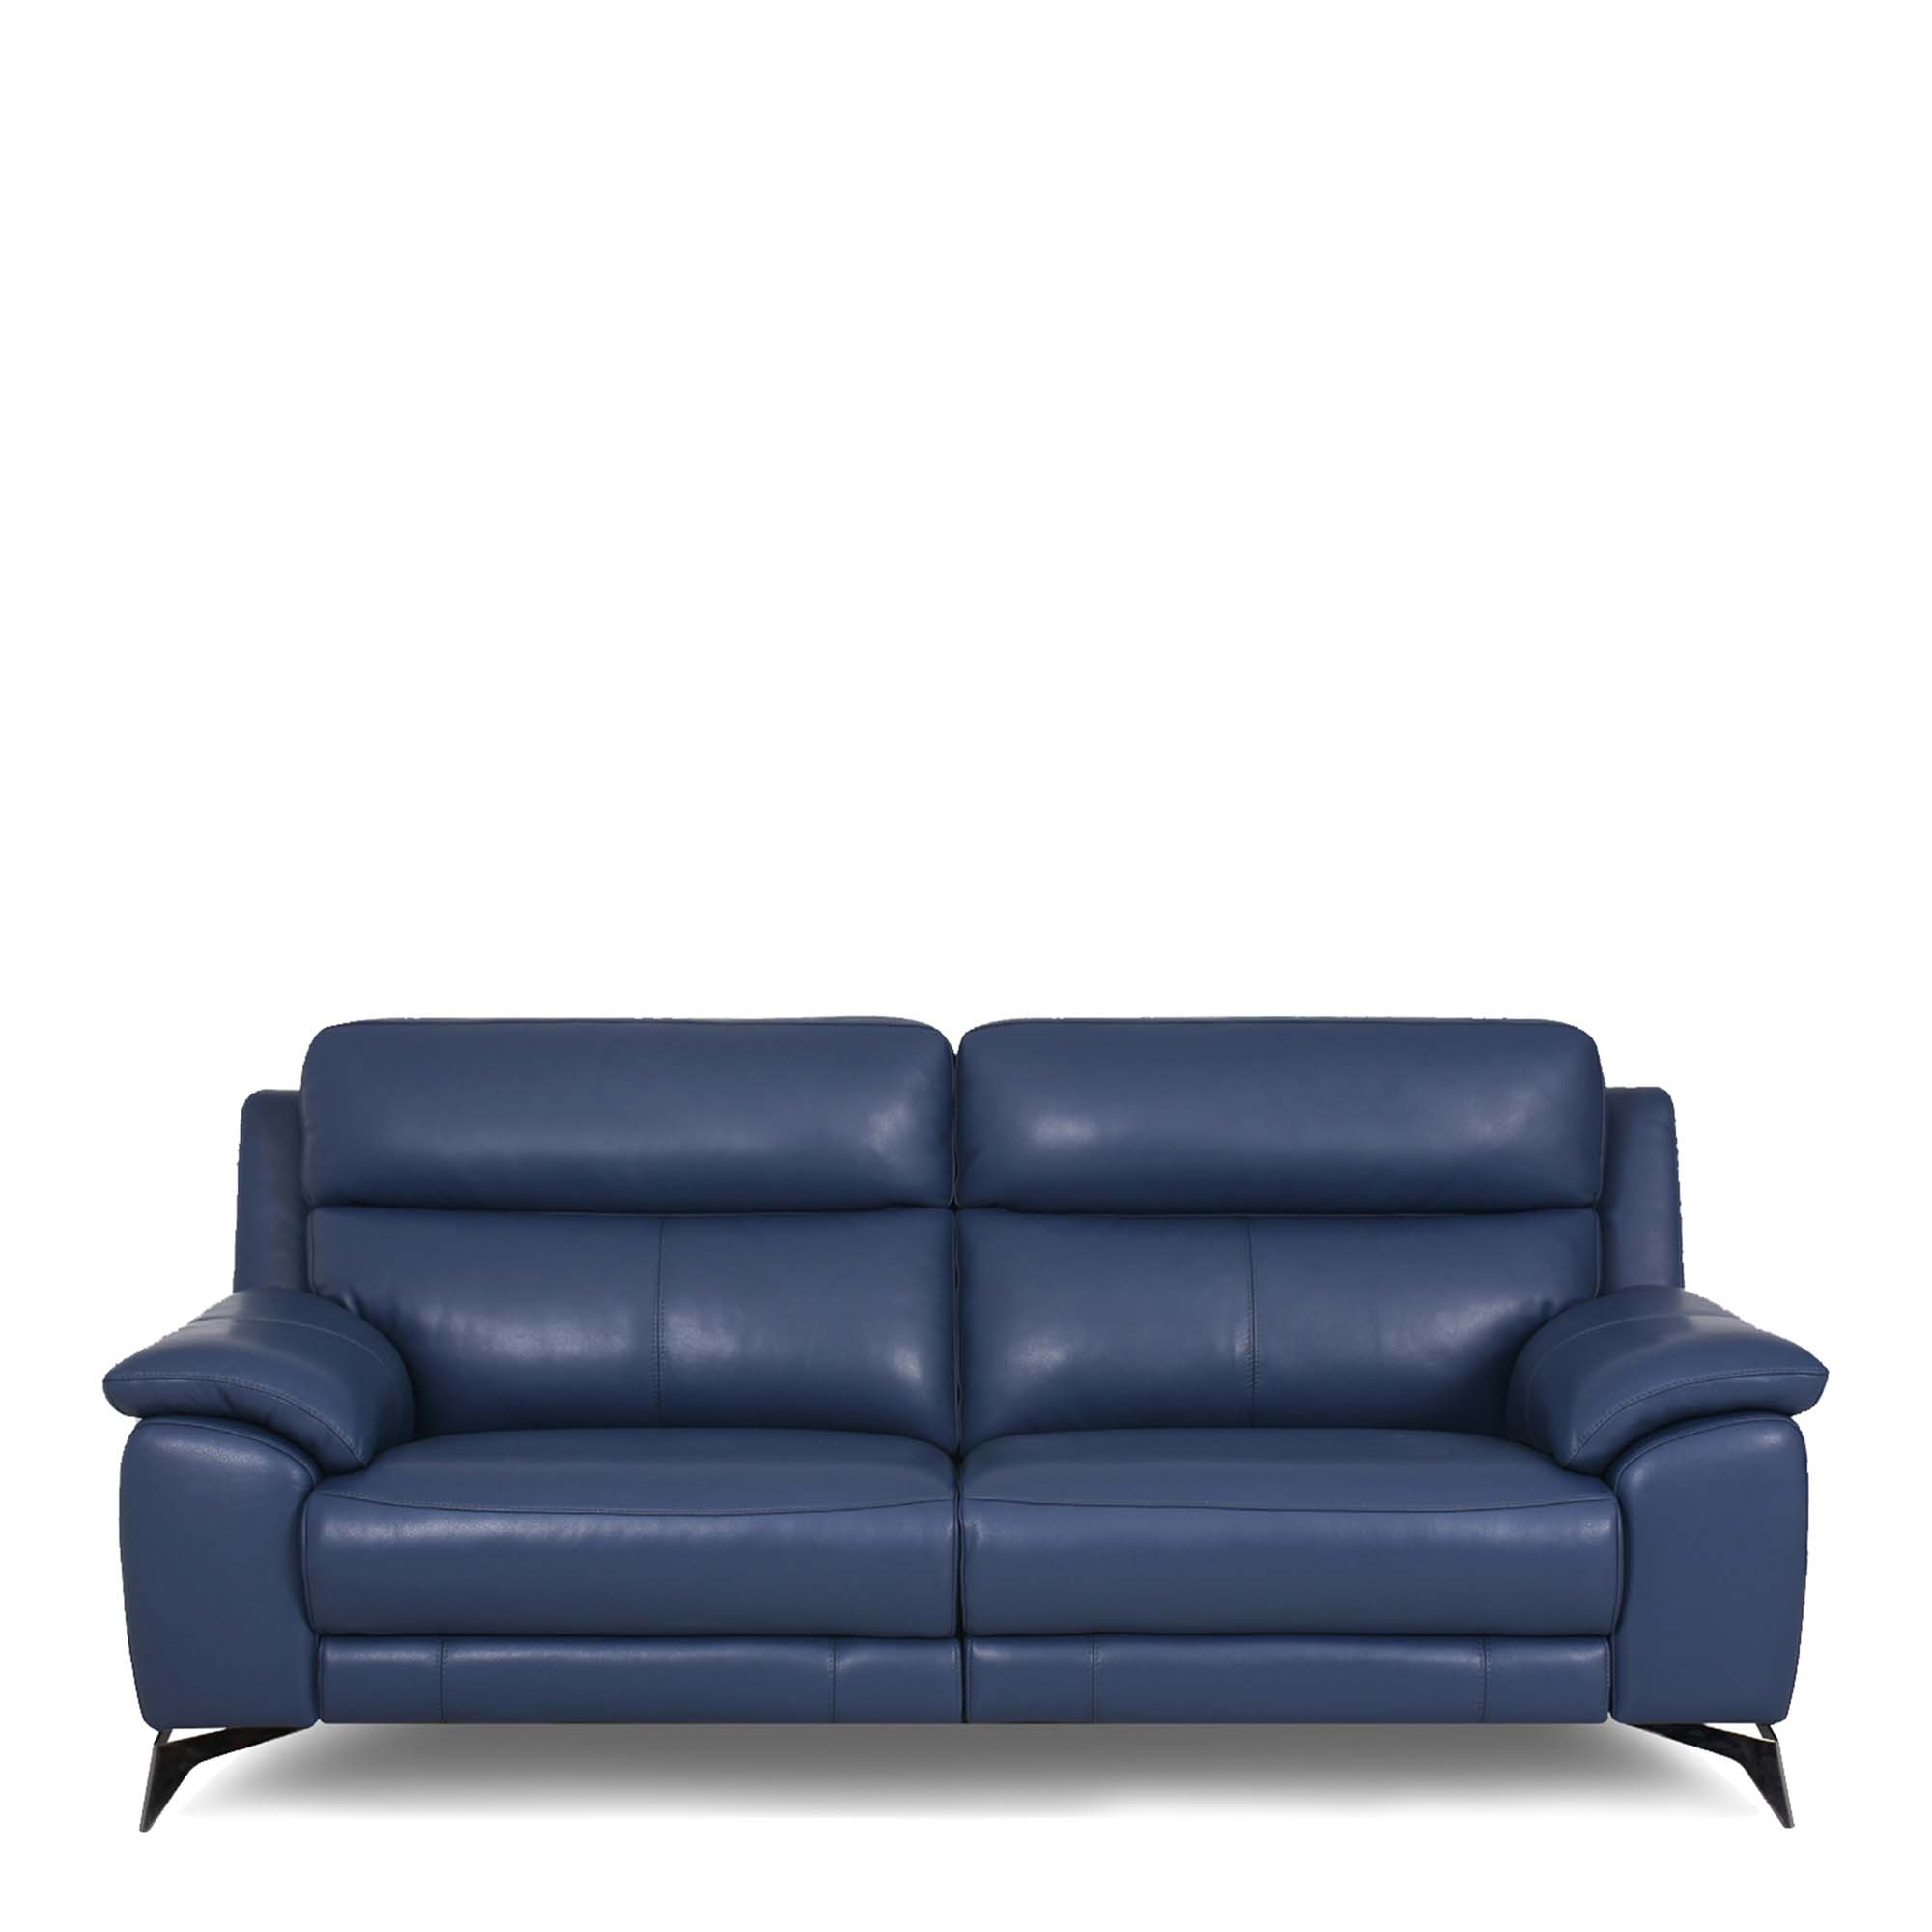 Miura 2 5 Seater Sofa With Power, Navy Leather Recliner Sofa